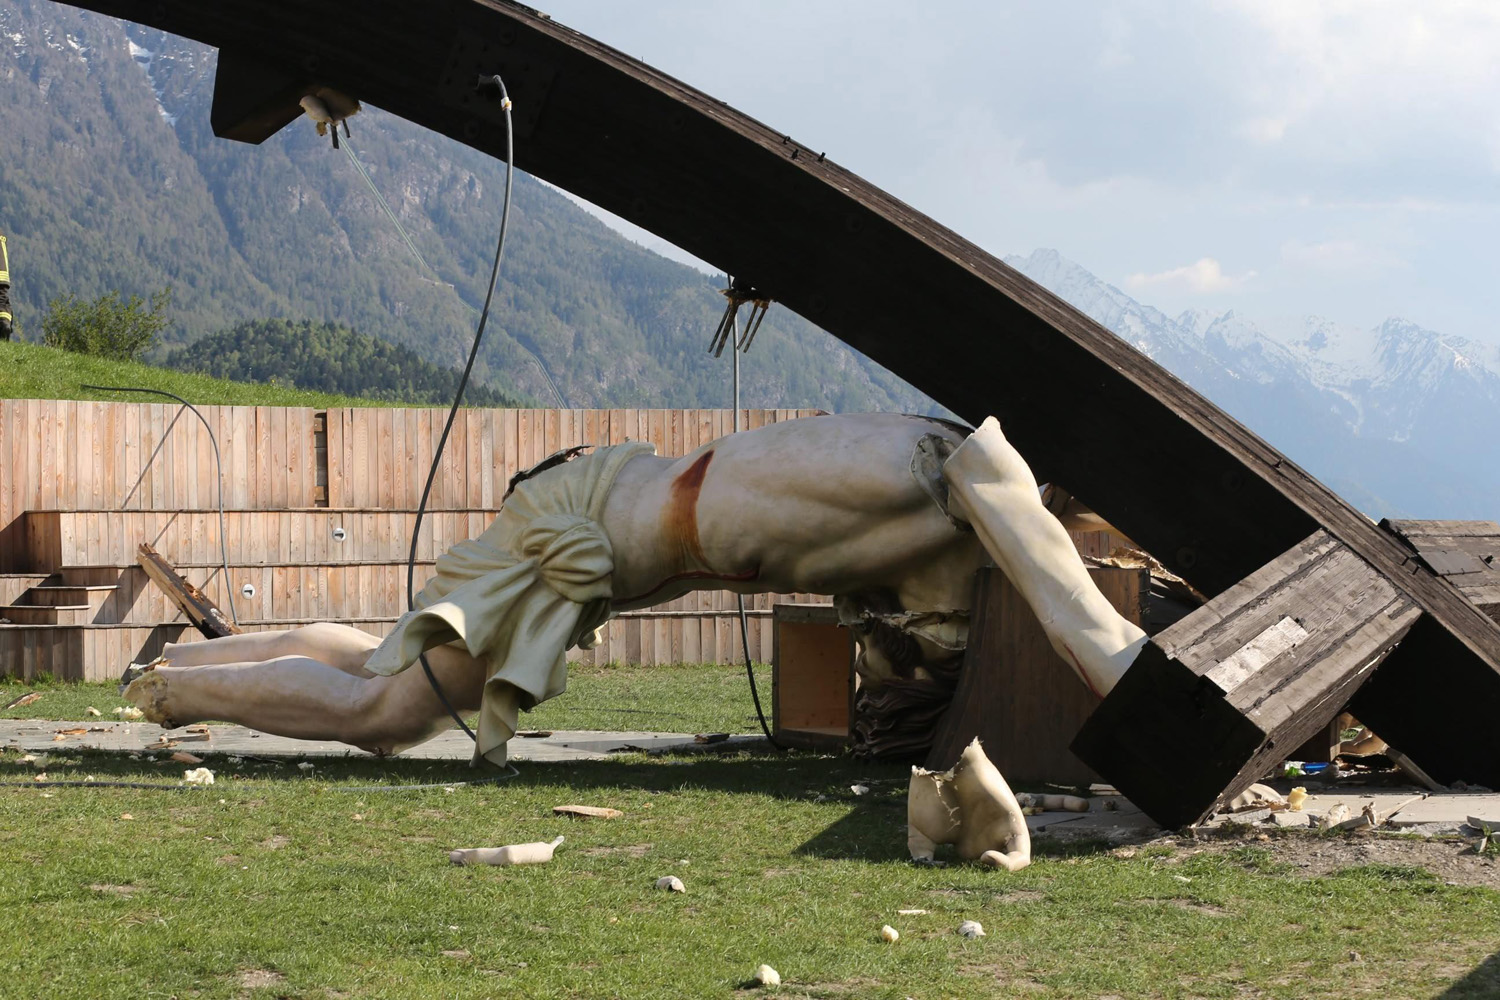 A general view of the broken statue after the 30-metre-high, curved wooden cross dedicated to the late John Paul II collapsed in Cevo, Valcamonica, Italy, 24 April 2014, killing a 21-year-old man.